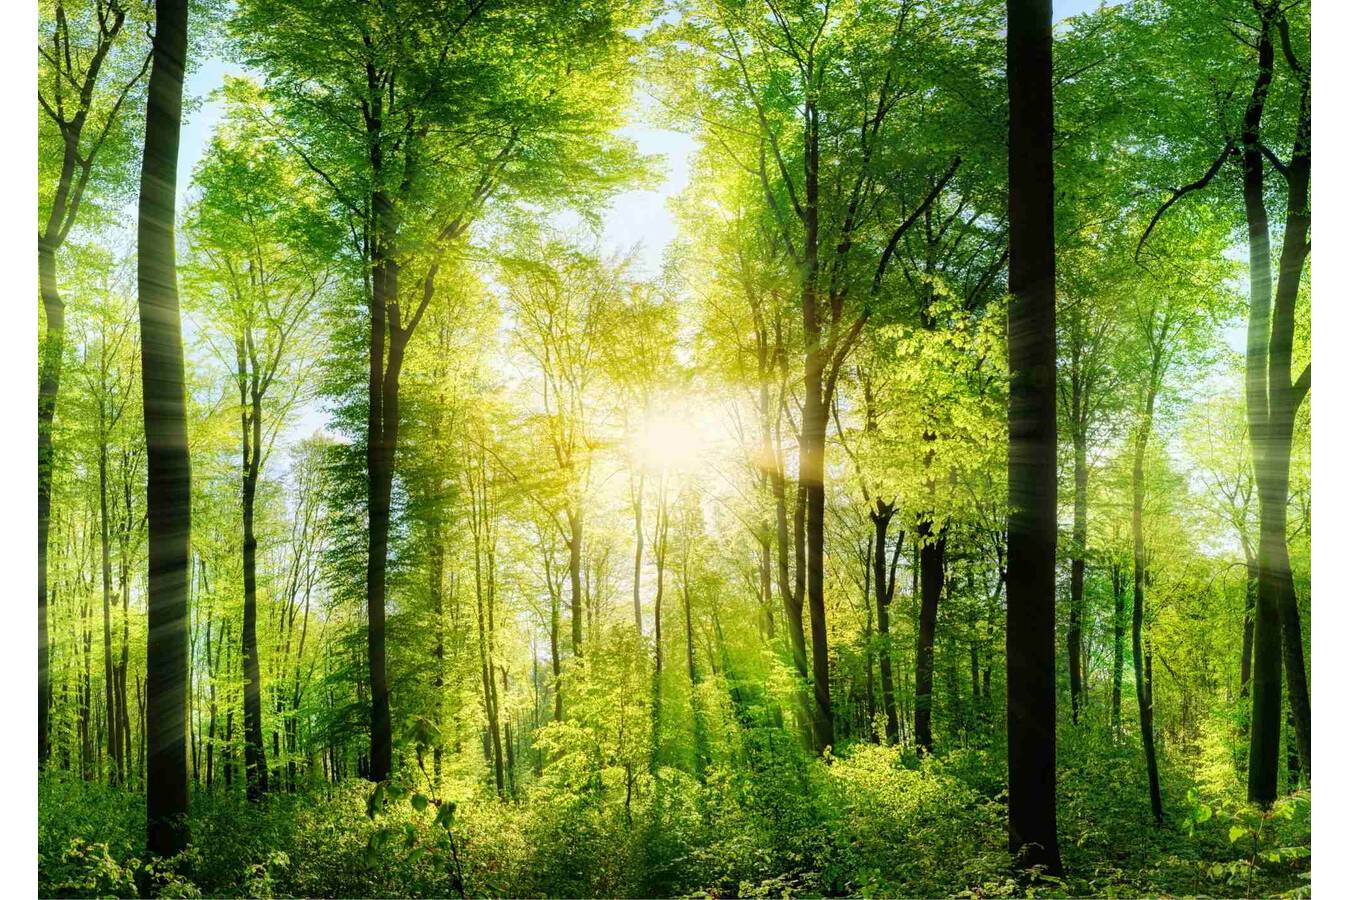 Refresh Yourself at the NOLL Stand: Forest Bathing at POWTECH How refreshing the walk through an exhibition can be. Sunlight, tranquility and the bliss of a green environment welcome visitors at NOLL Processing Technology, Stand 4A-229. 

